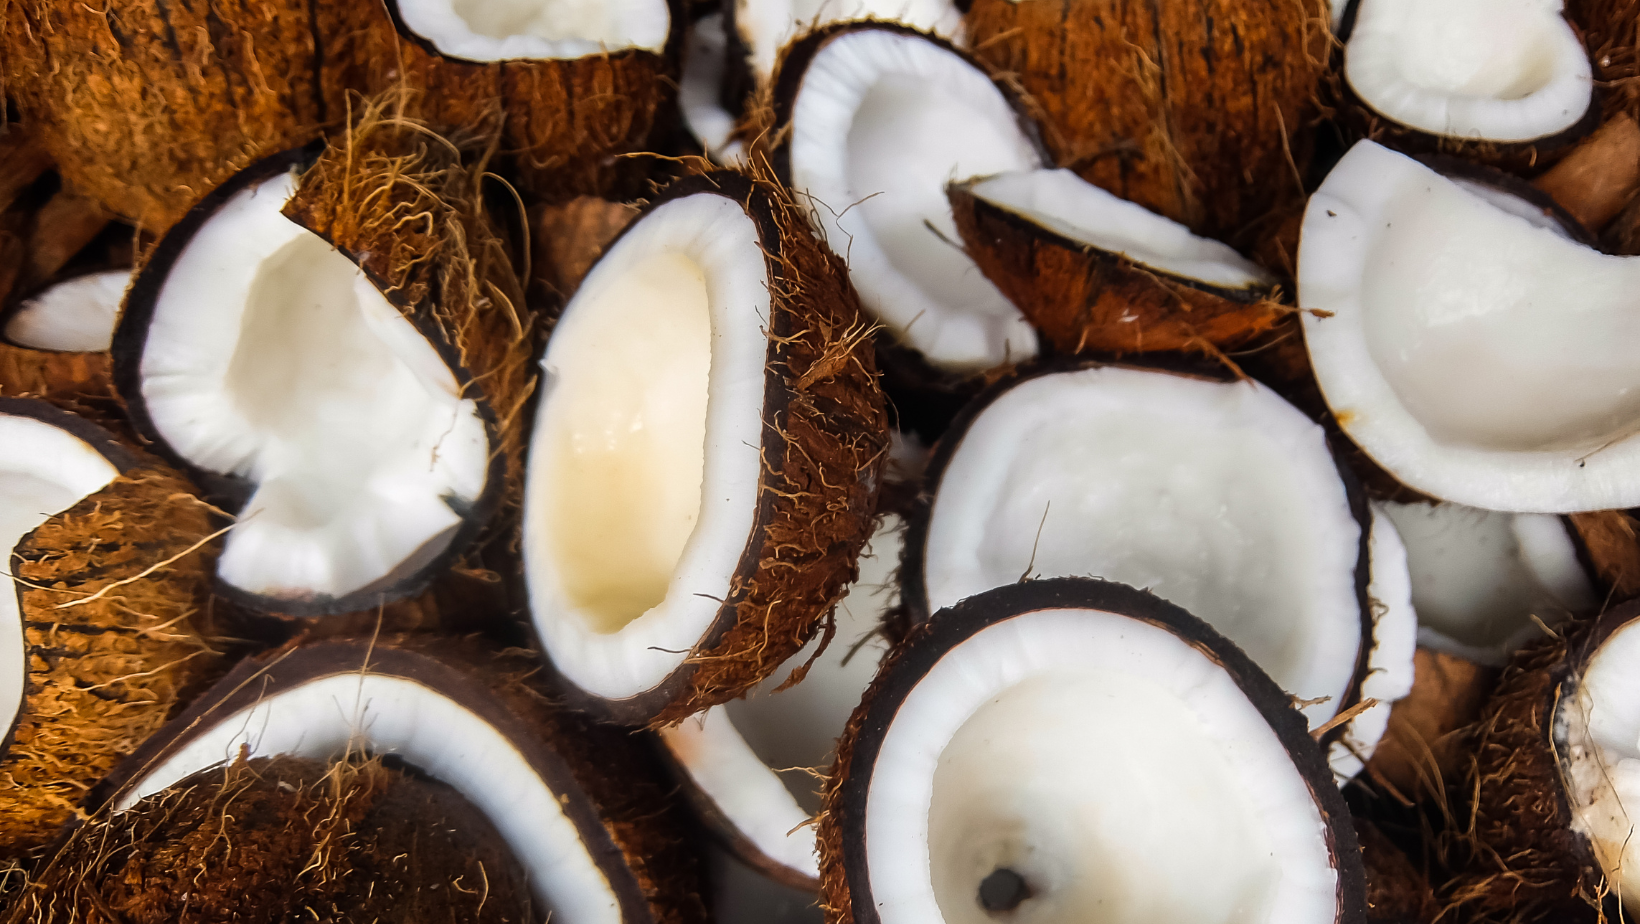 Coconut Oil - It isn’t just for cooking or making your hair shinier…